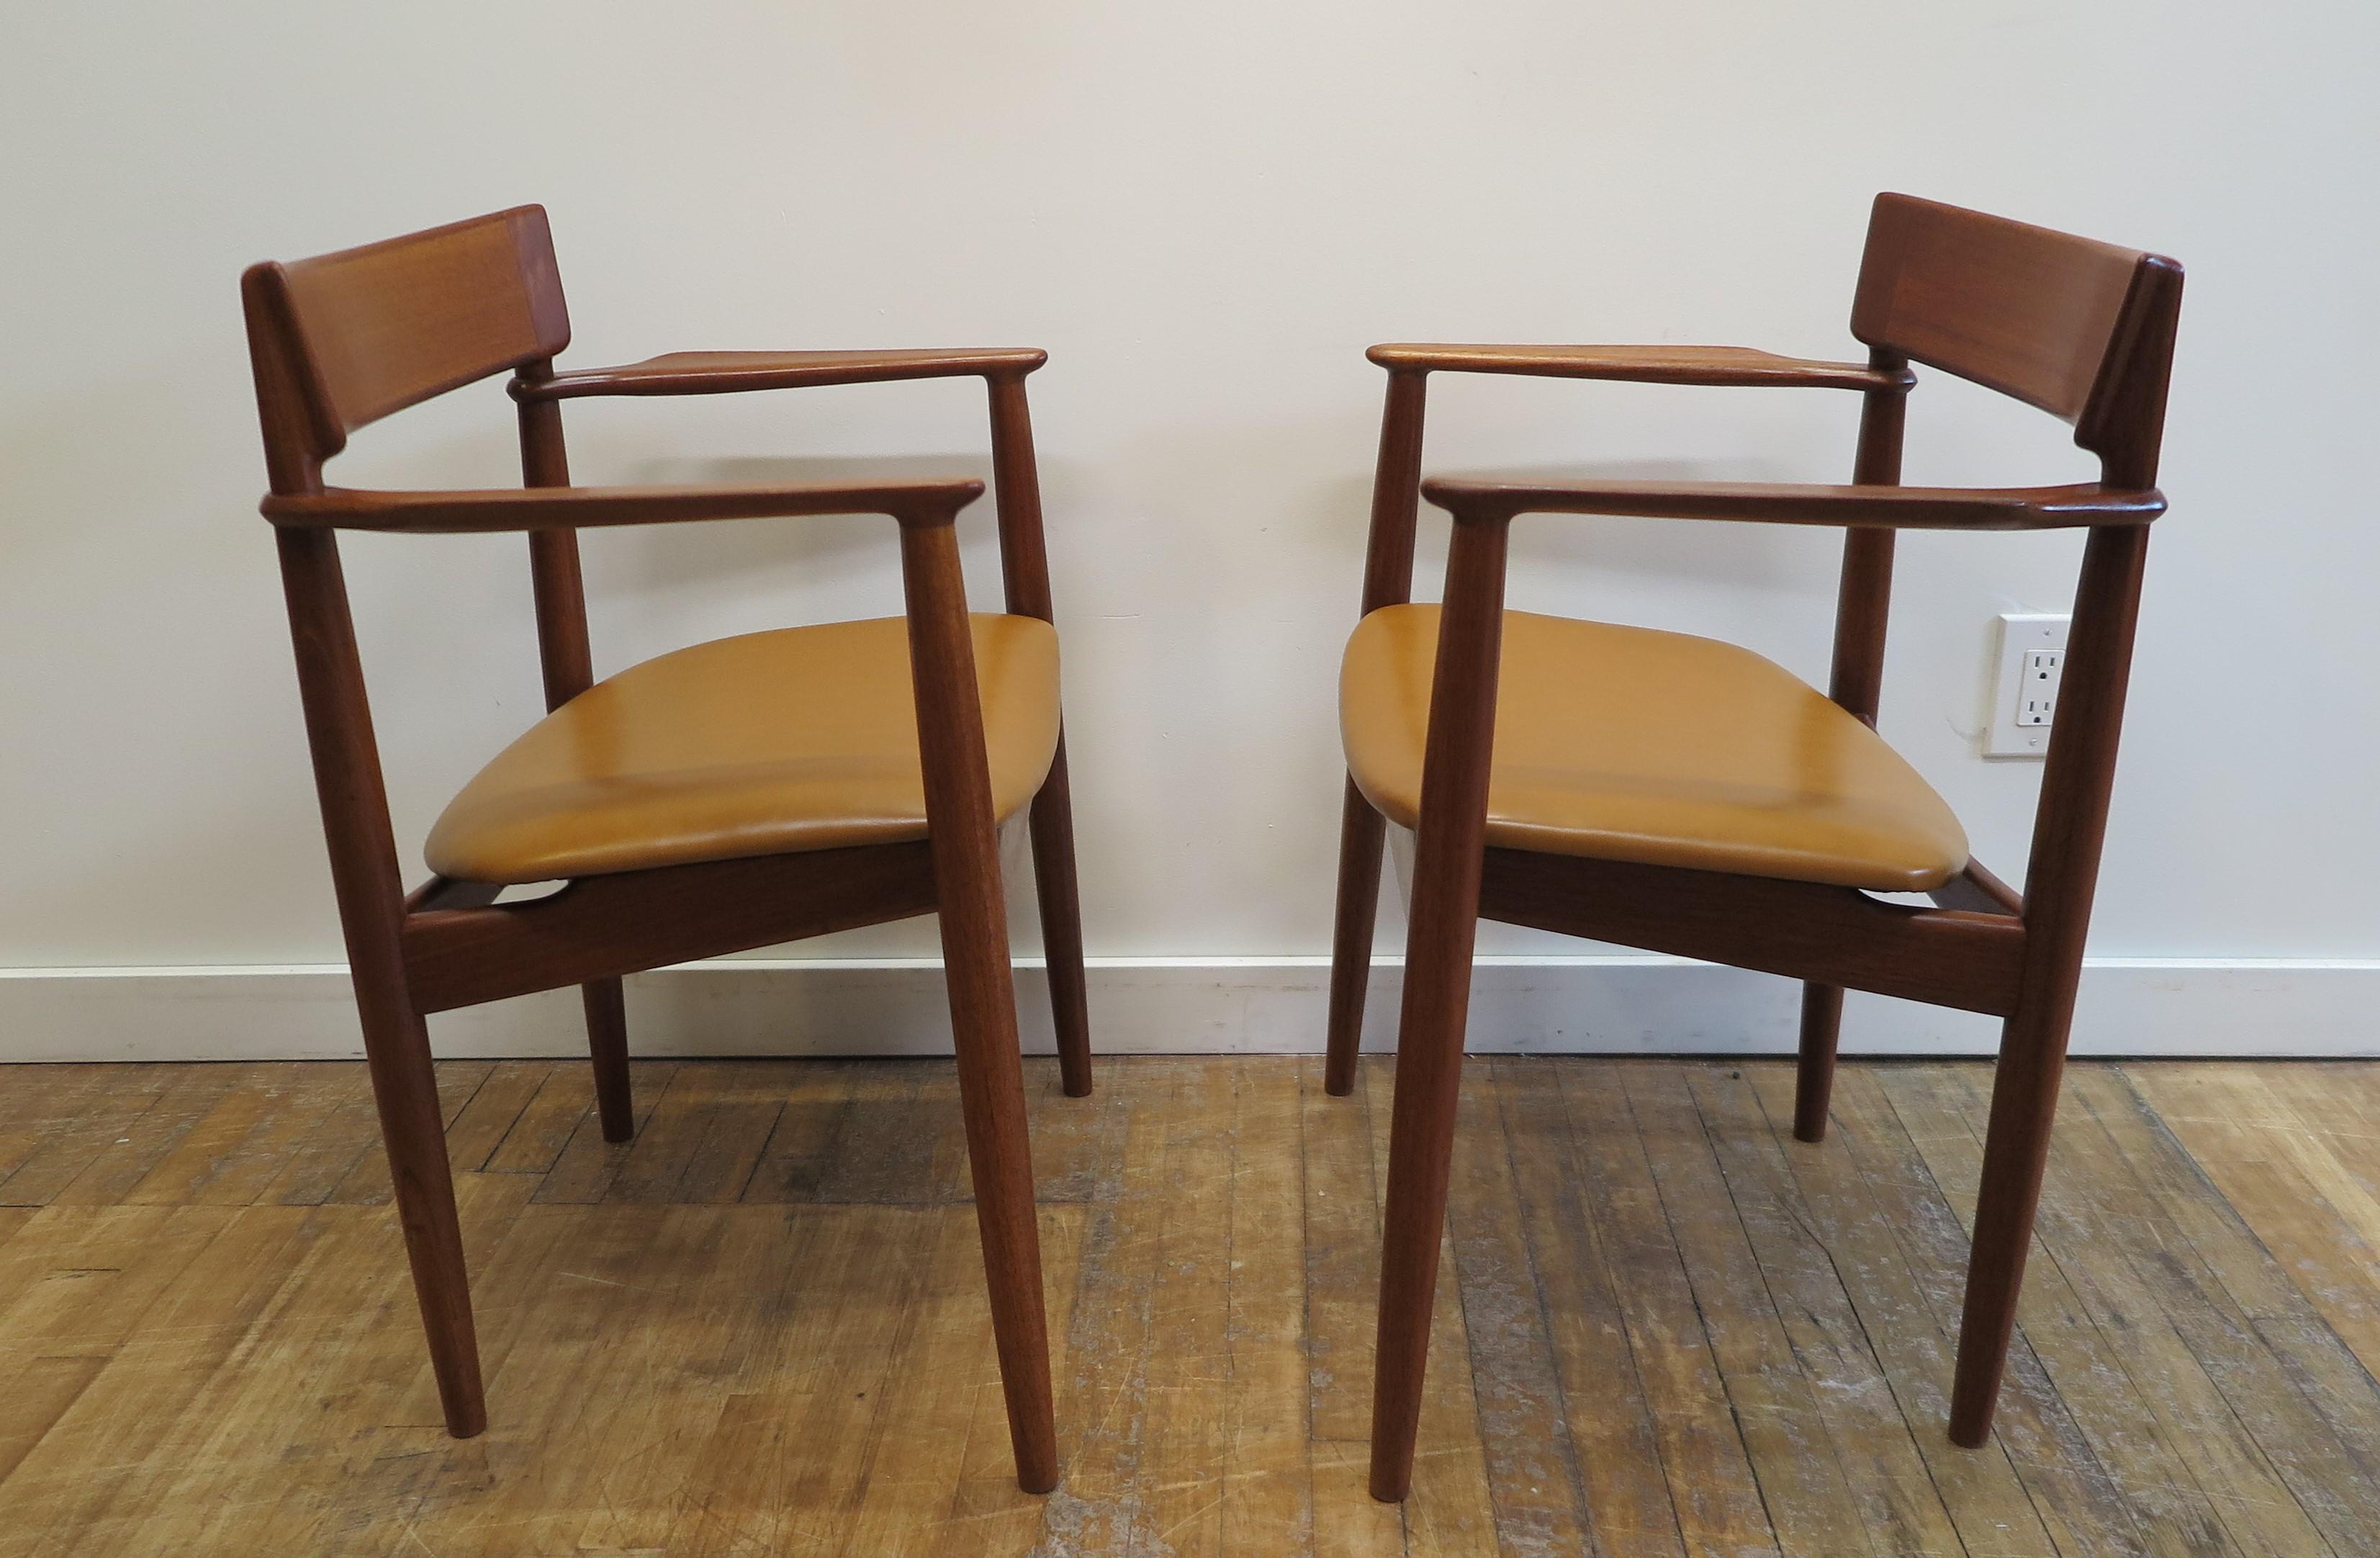 Henry Rosengren Hansesn Armchairs.  Stunning pair of Henry Rosengren Hansen sculpted Armchairs in rosewood produced by Brande Mobelindustri in Denmark. 
Beautiful aesthetic quality showcasing exceptional craftsmanship.  The chairs are comfortable as